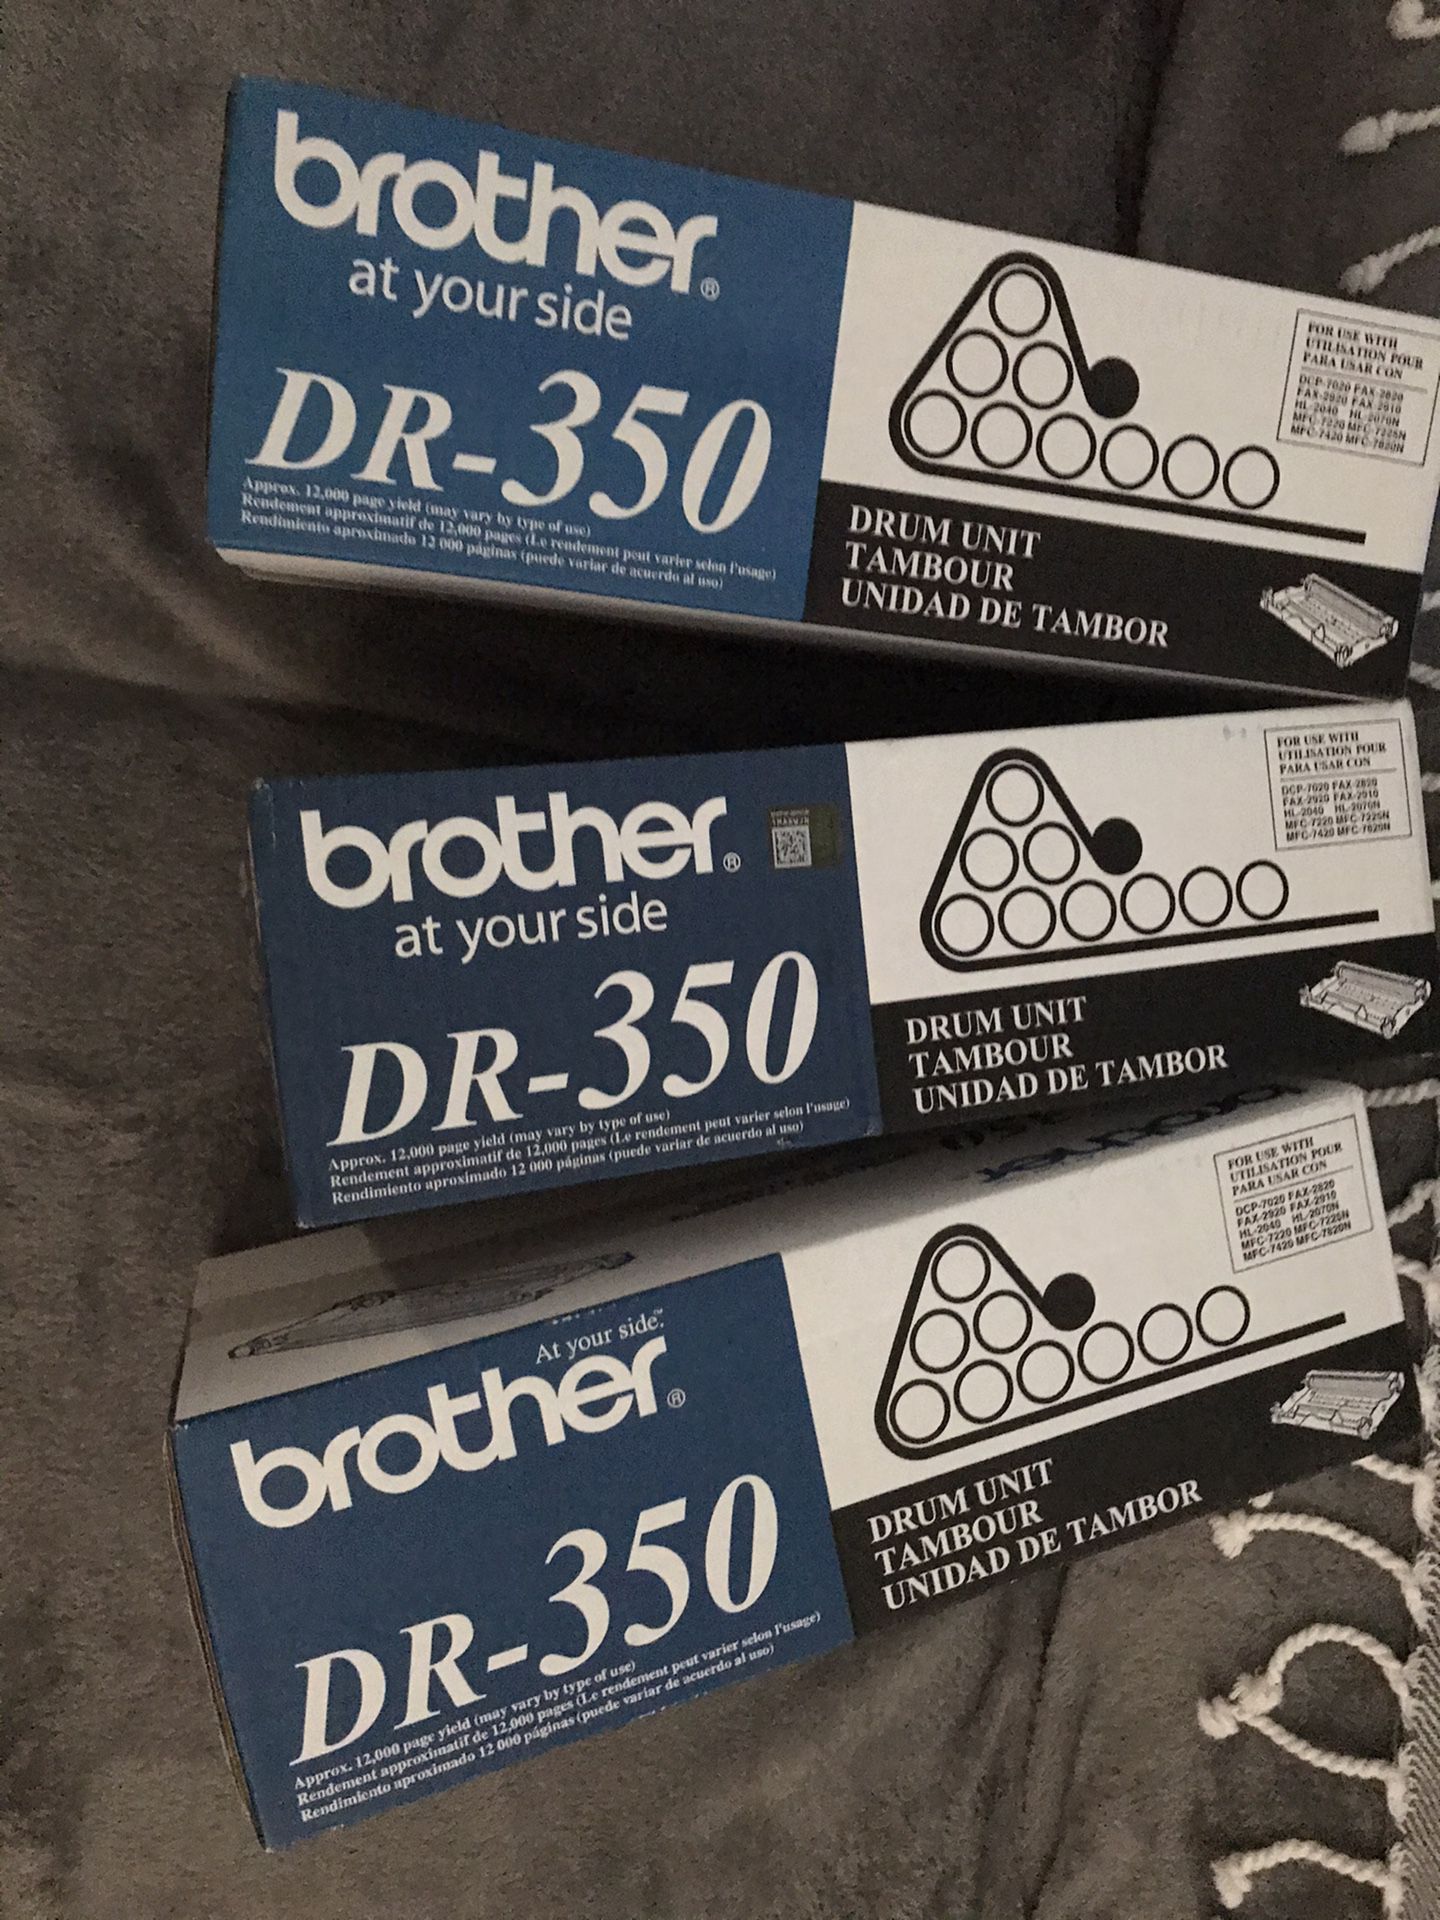 3 New unopened-brother DR-350 drum units